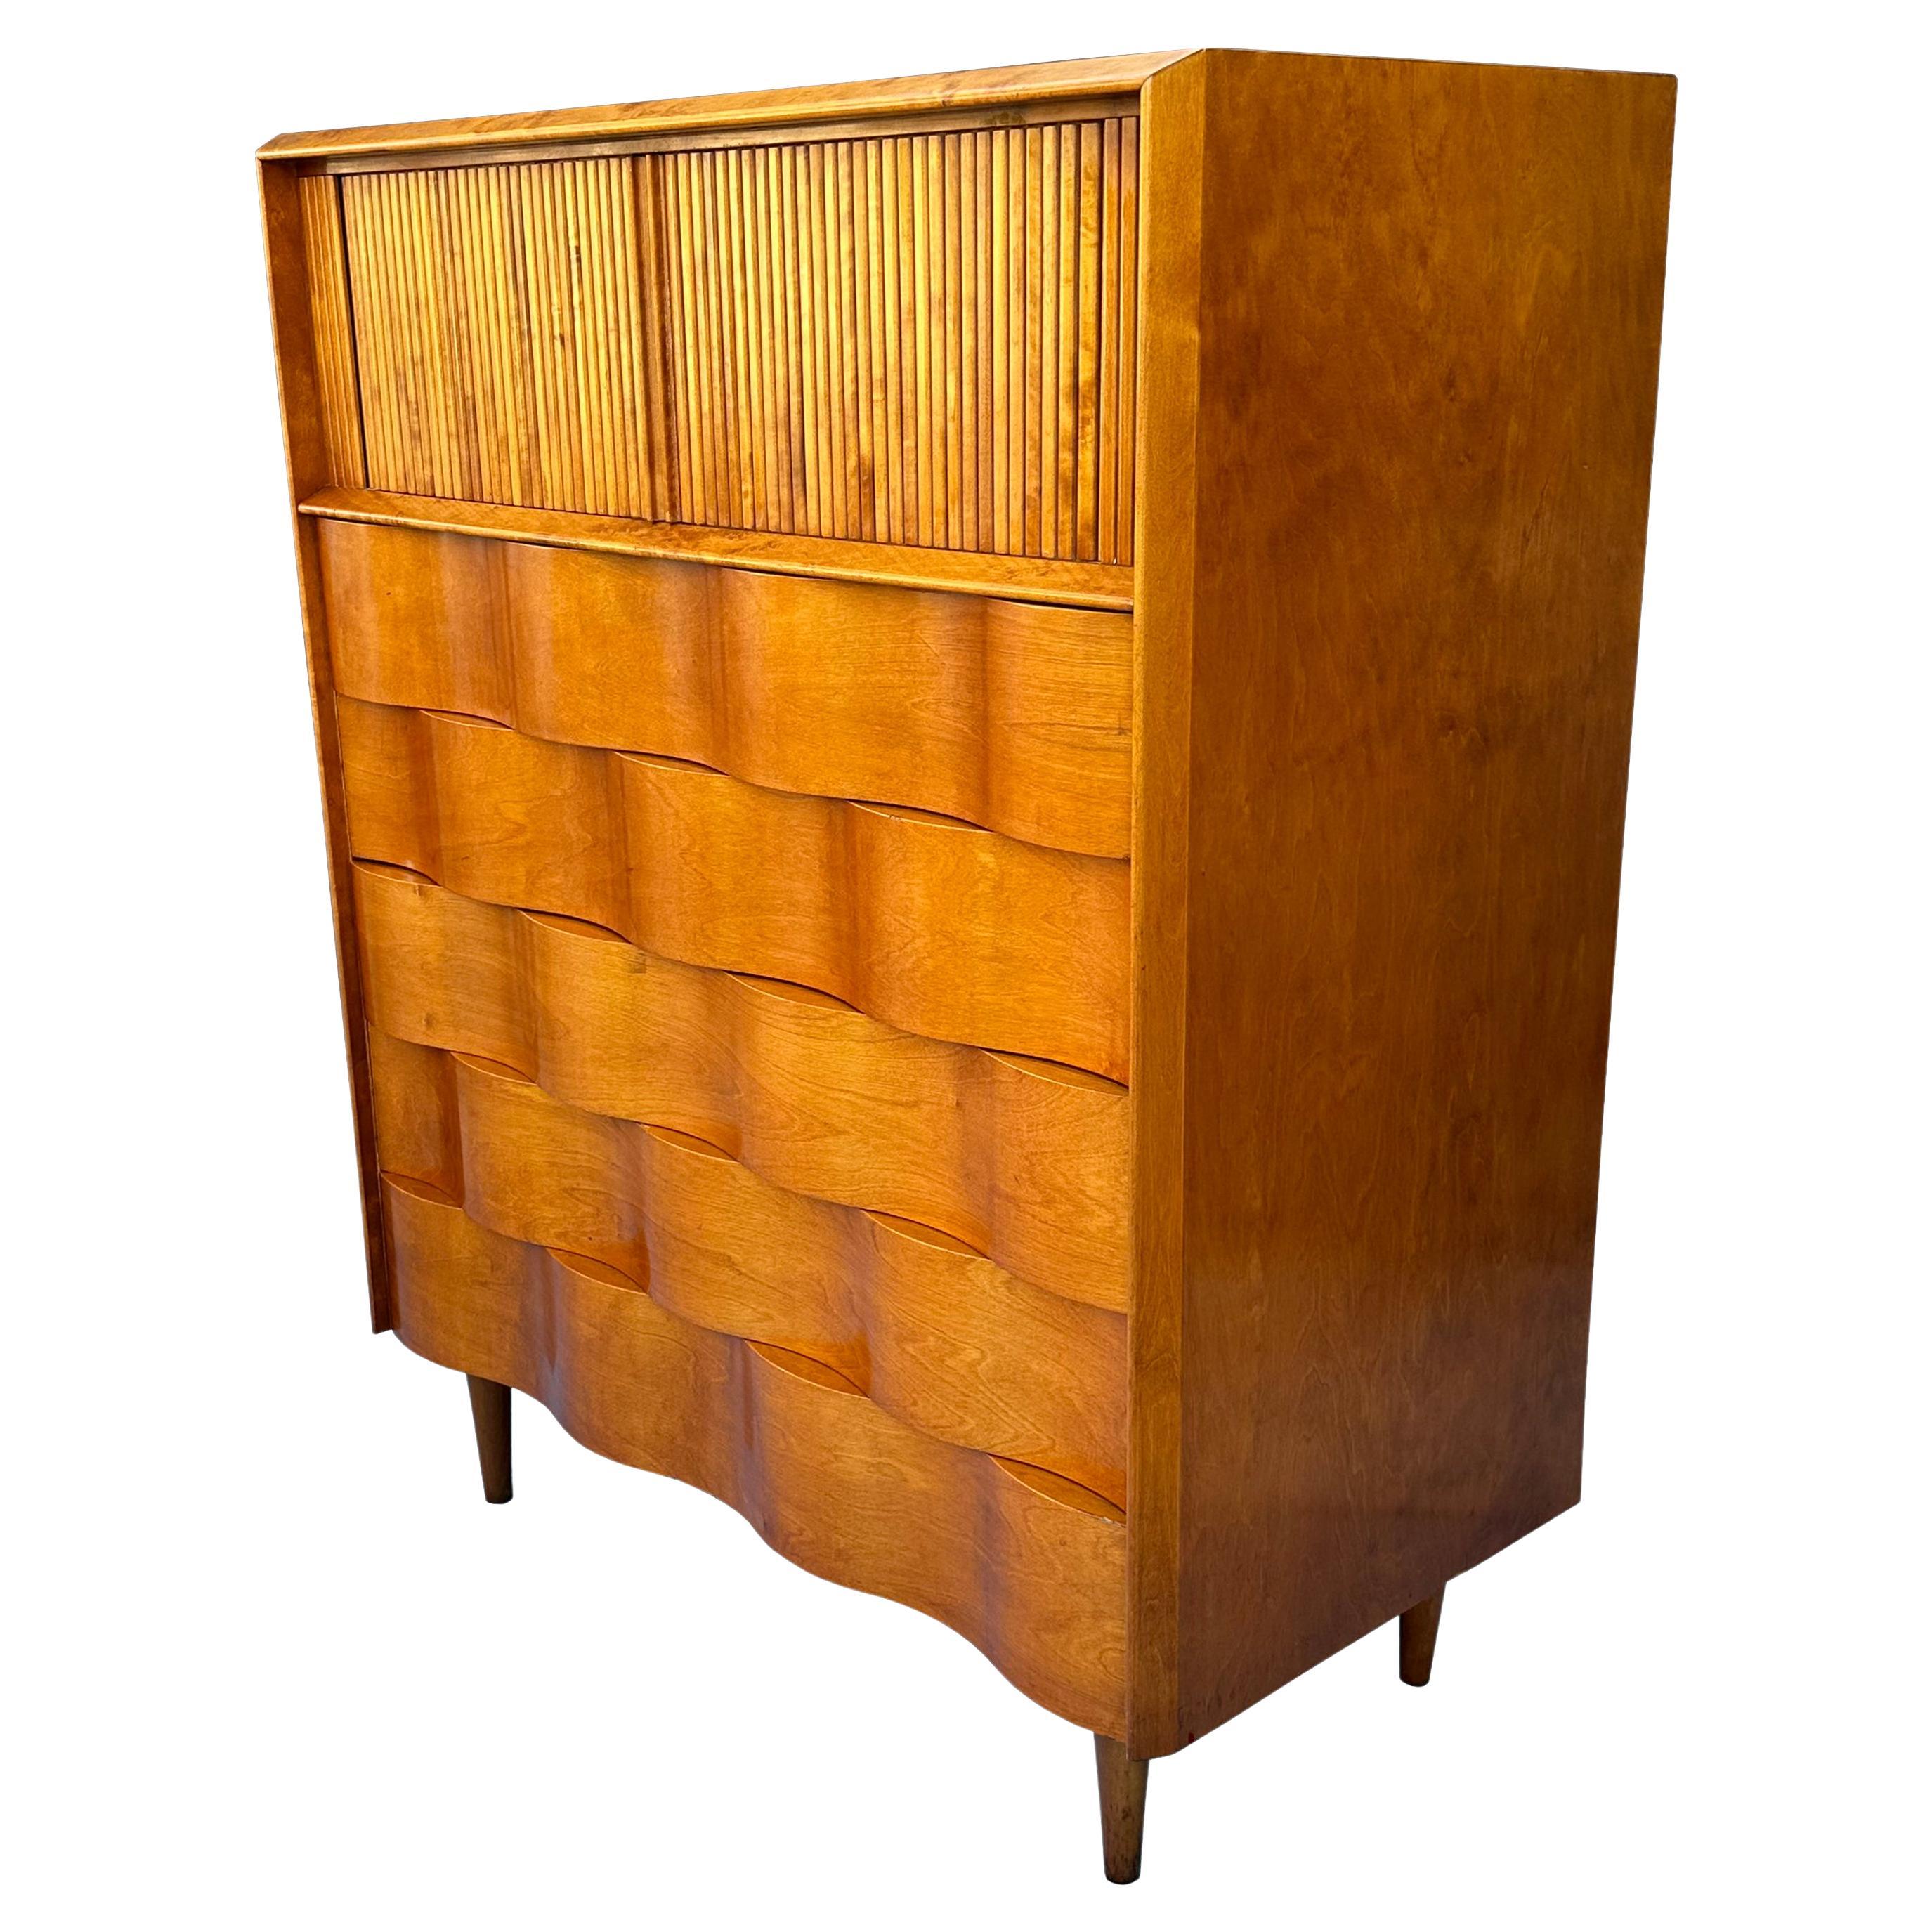 Mid Century Modern wavey front highboy gentleman's chest.  Gorgeous birch wood sculptural design featuring tambor door cabinet on top and 5 drawers below, atop 4 long dowel legs.  Designed by Edmond Spence and manufactured in Sweden. This would